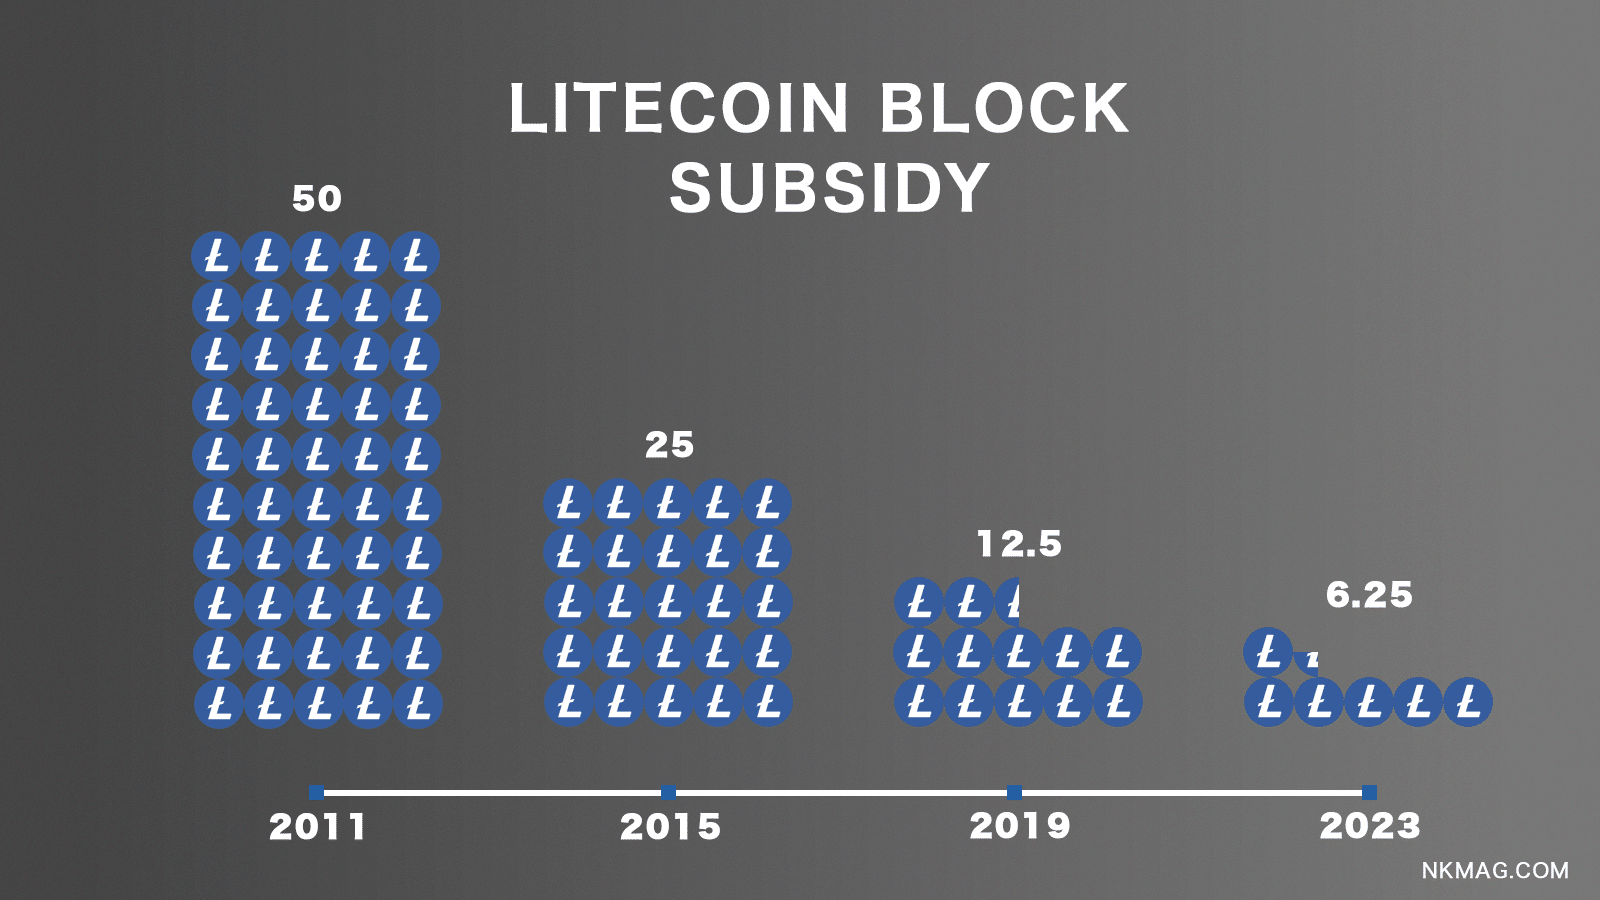 Litecoin block rewards, or subsidies, form the incentive for miners who expend their computational resources to validate transactions and add new blocks to the Litecoin blockchain.